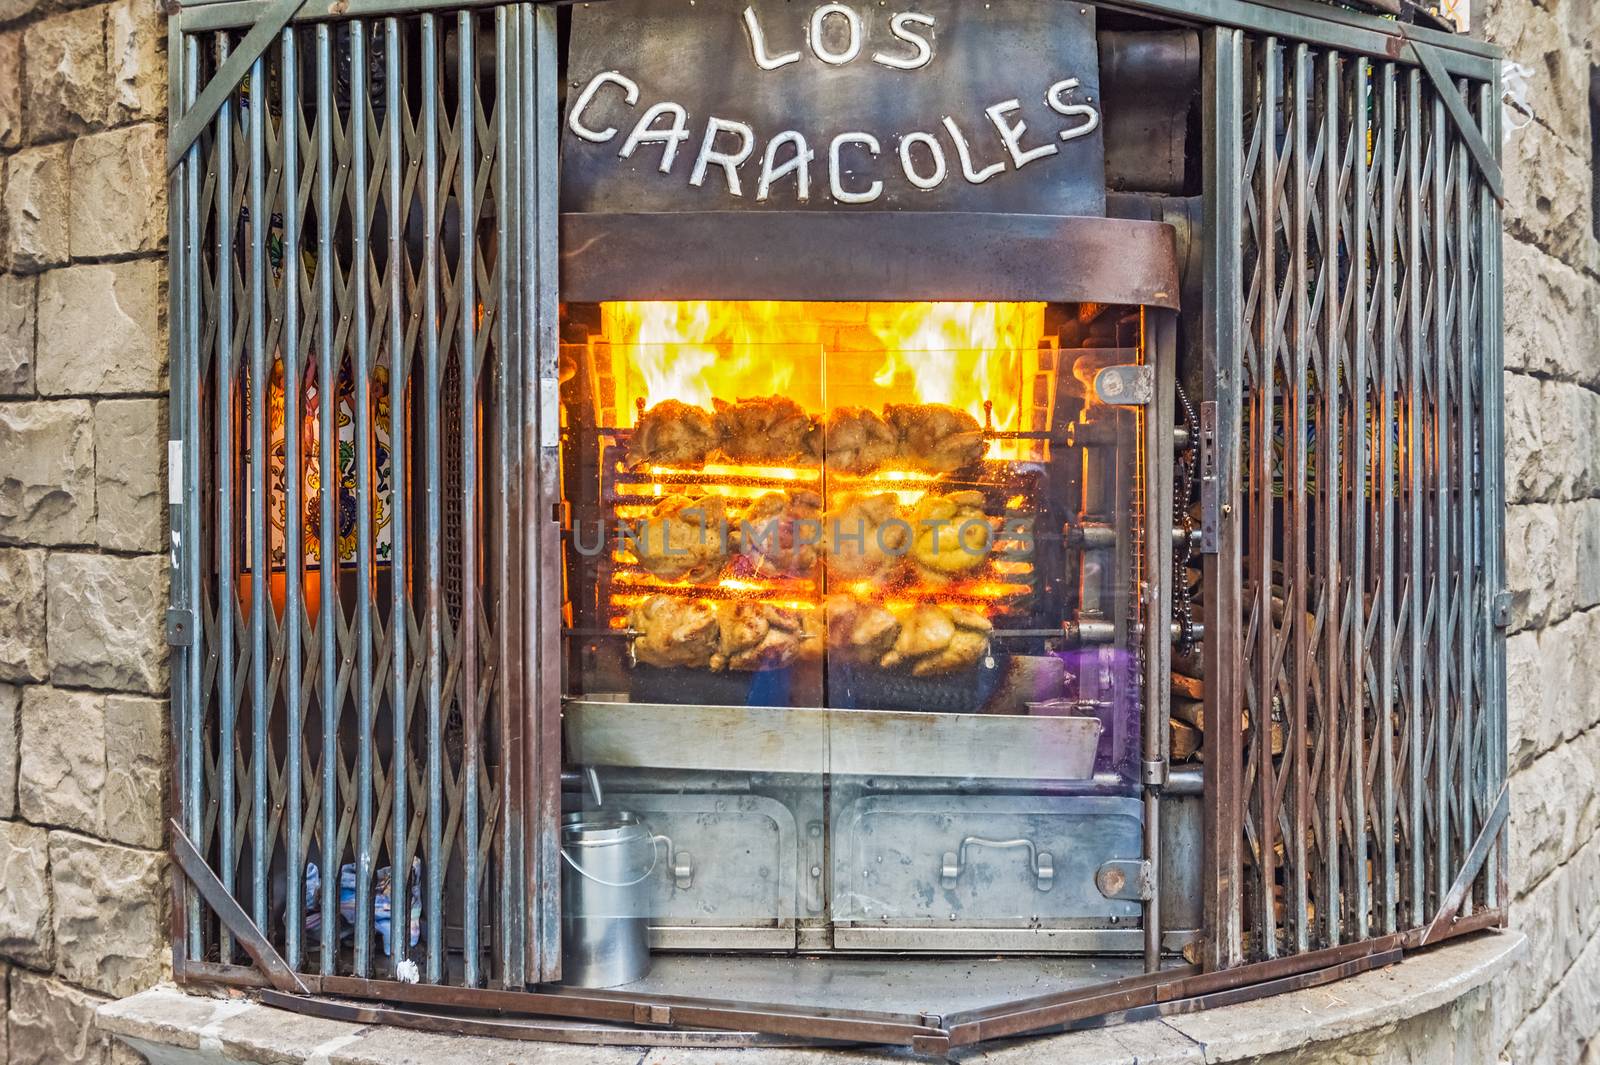 Los Caracoles restaurant in Barcelona, Spain. by Marcus